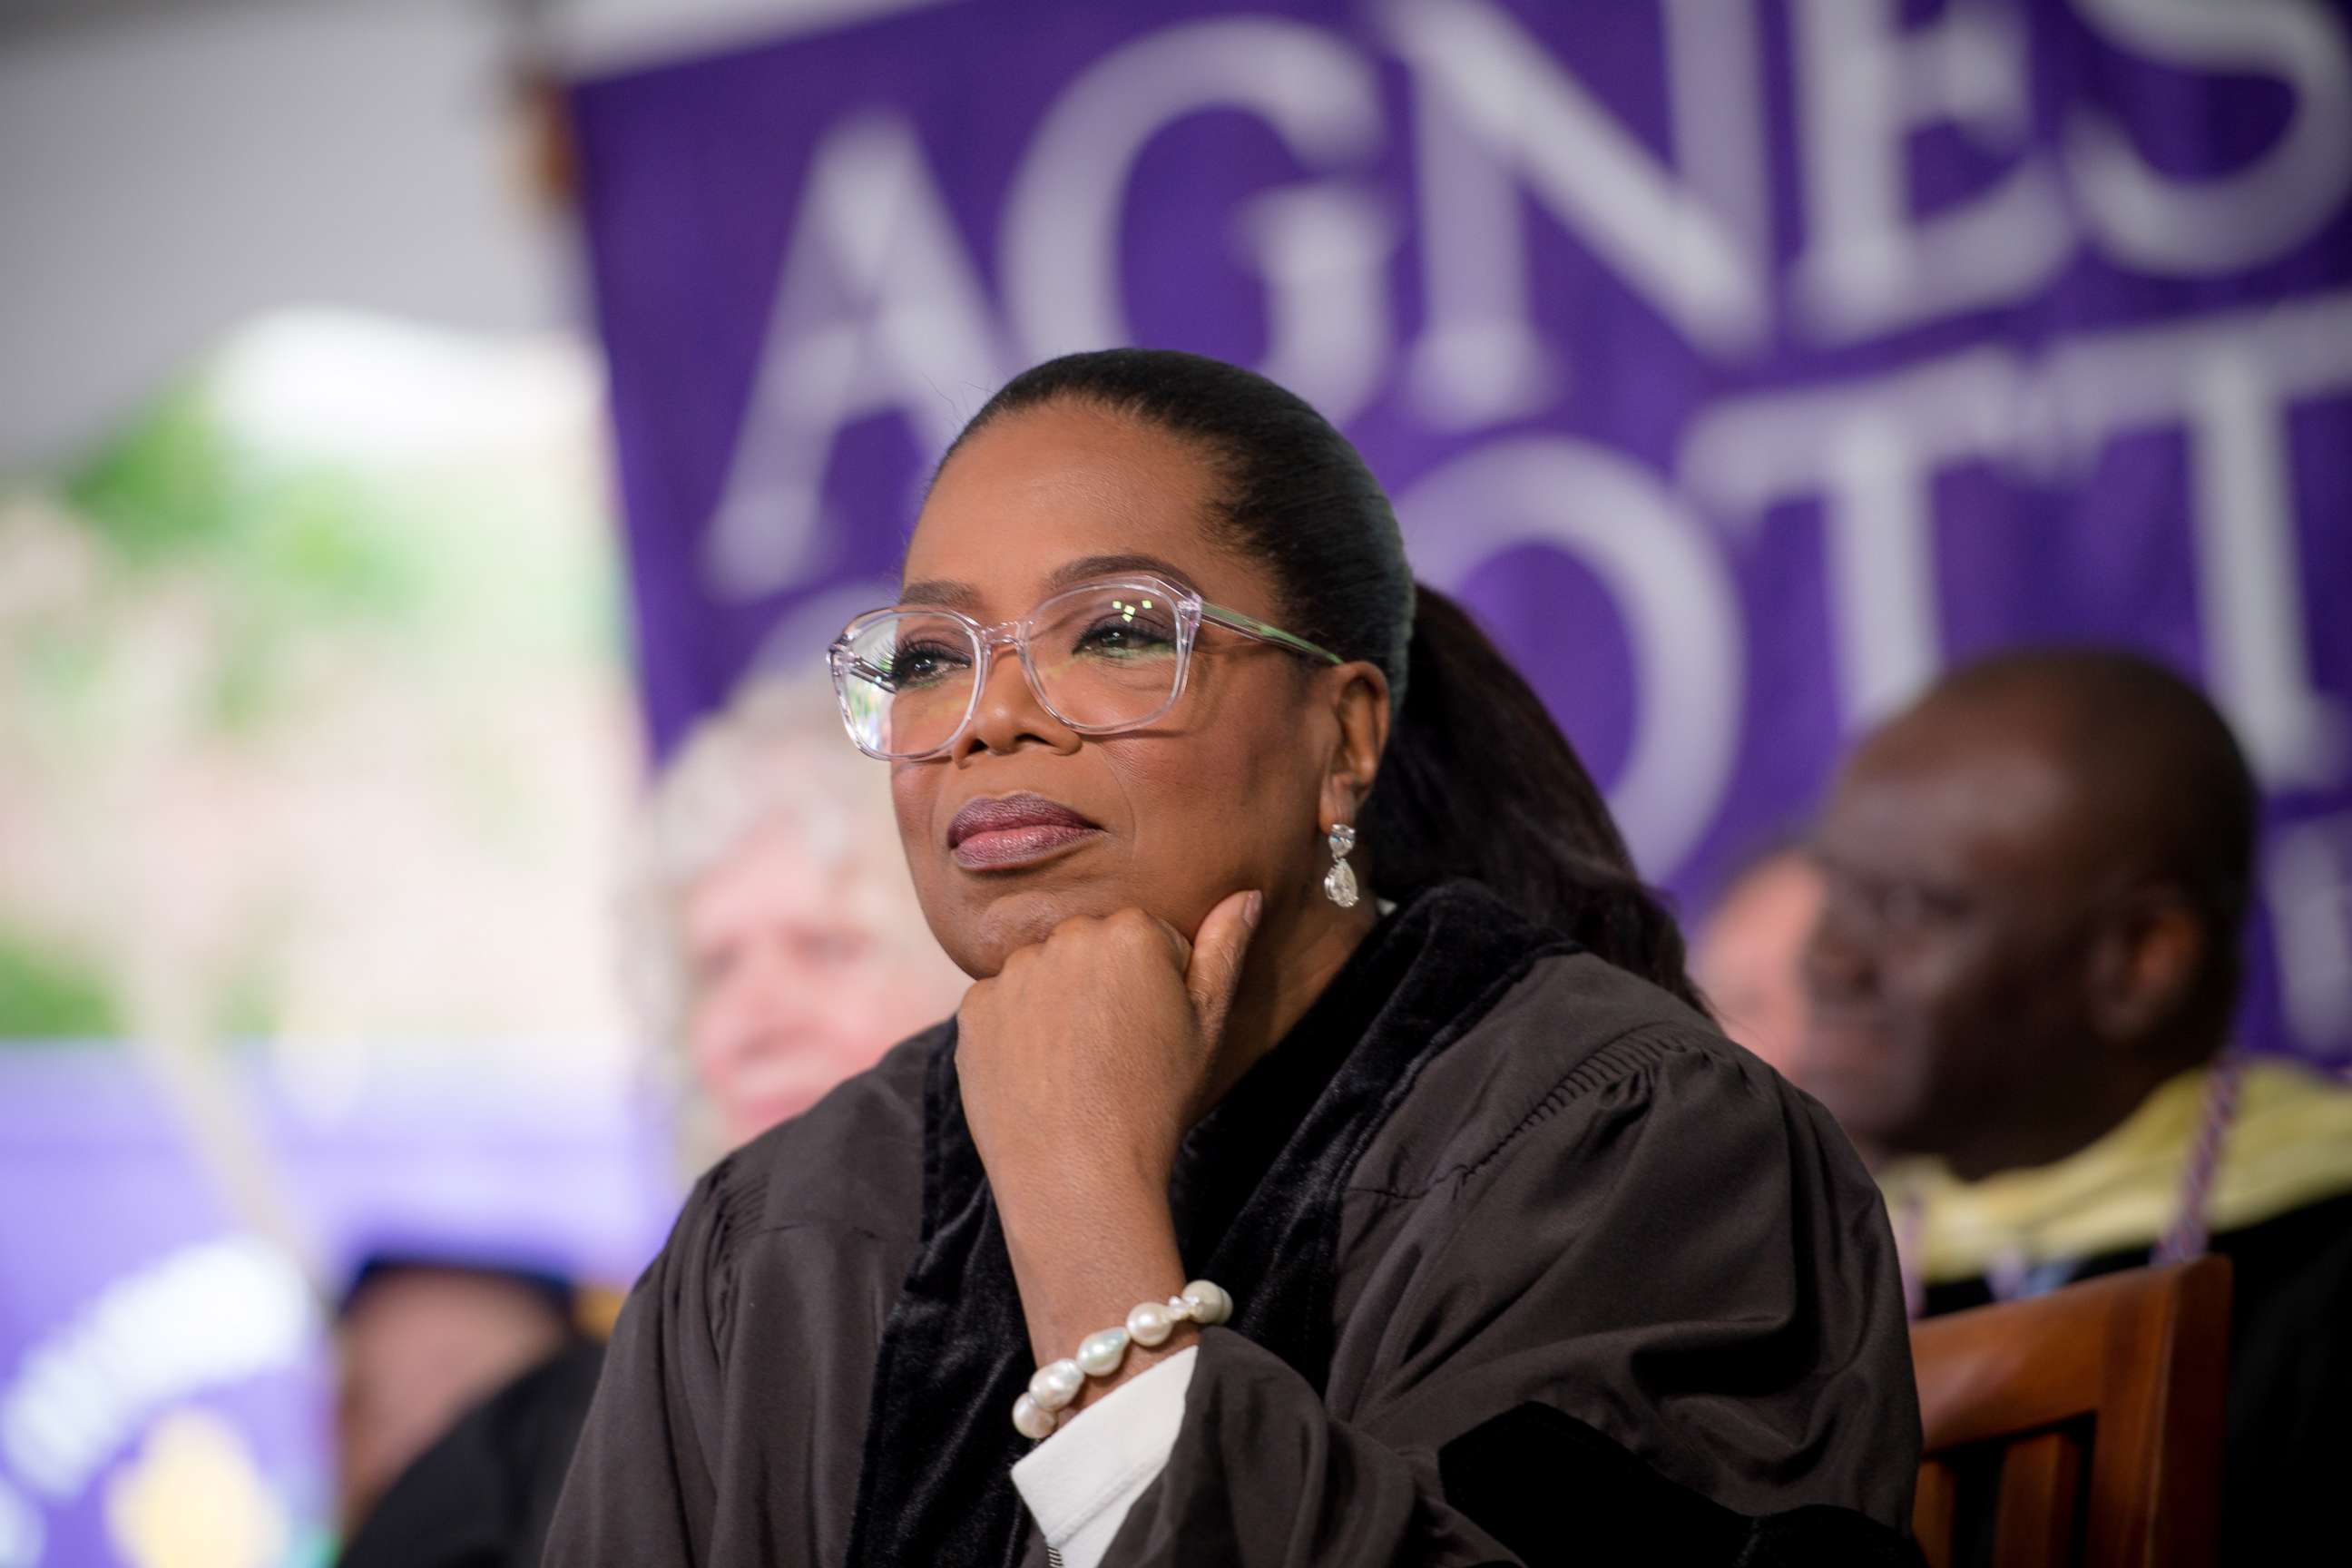 PHOTO: Oprah Winfrey on stage during the Agnes Scott College 2017 Commencement at Agnes Scott College, on May 13, 2017, in Decatur, Ga.  